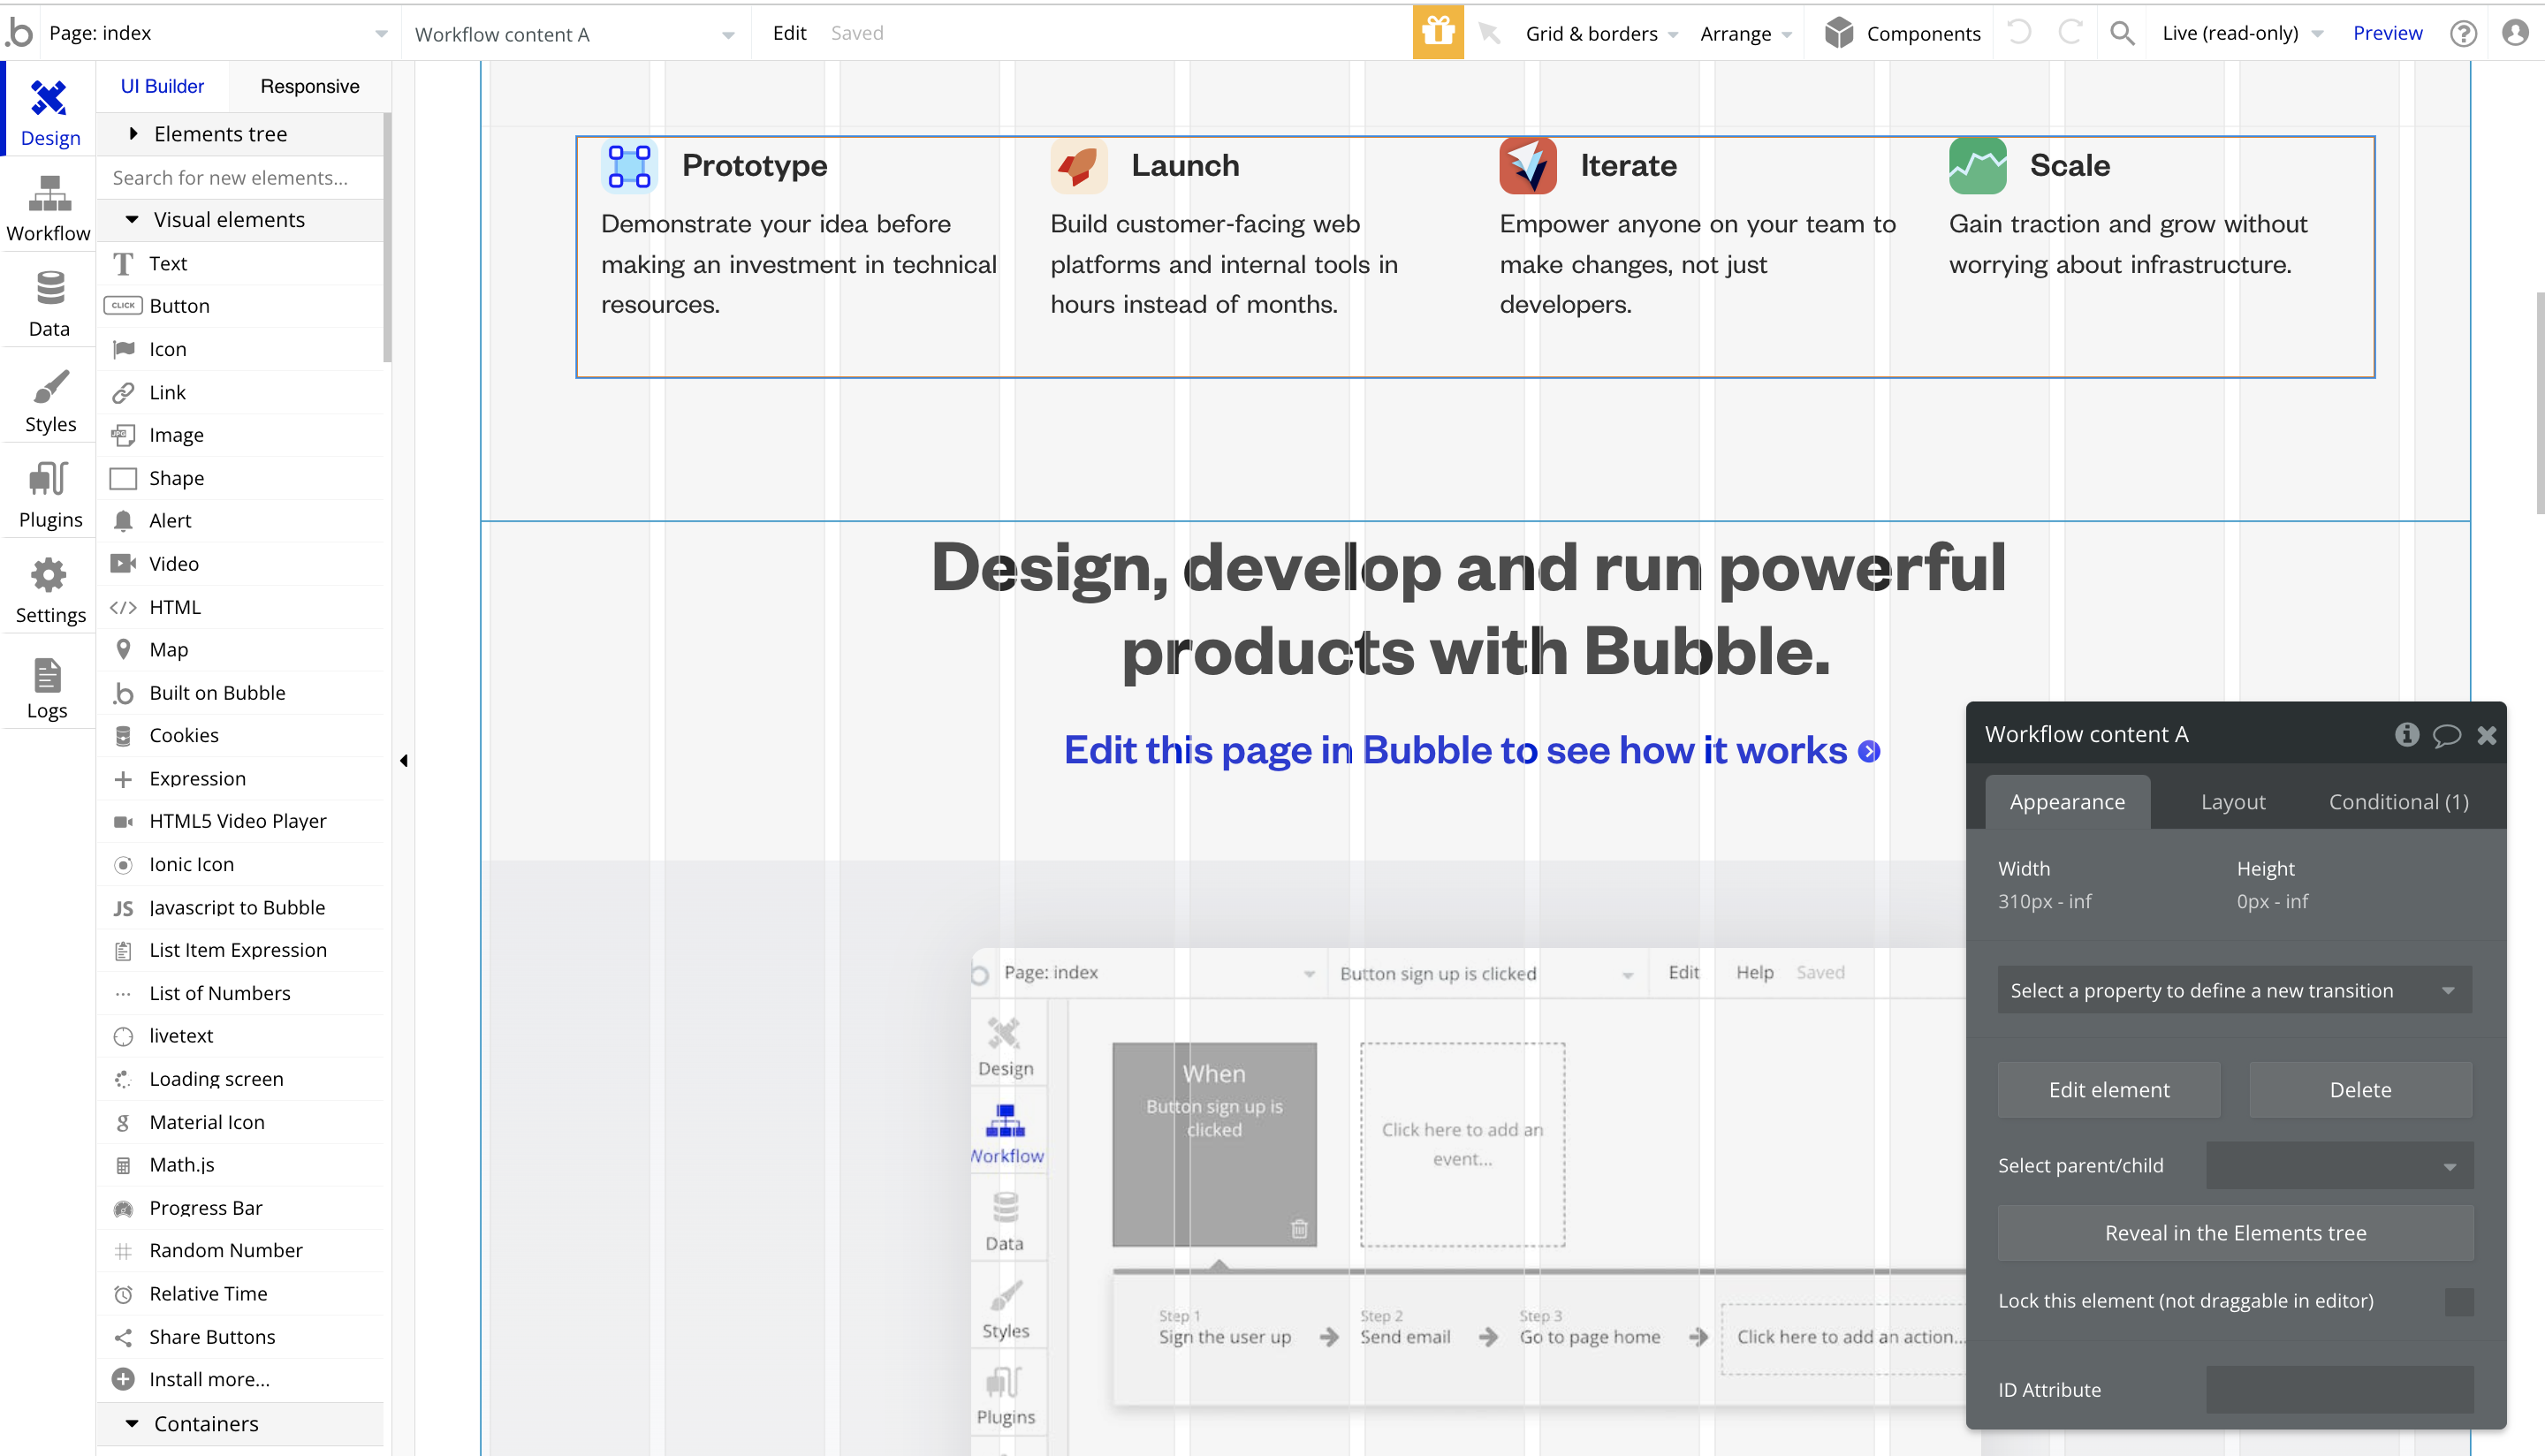 Bubble's responsive, drag-and-drop editor